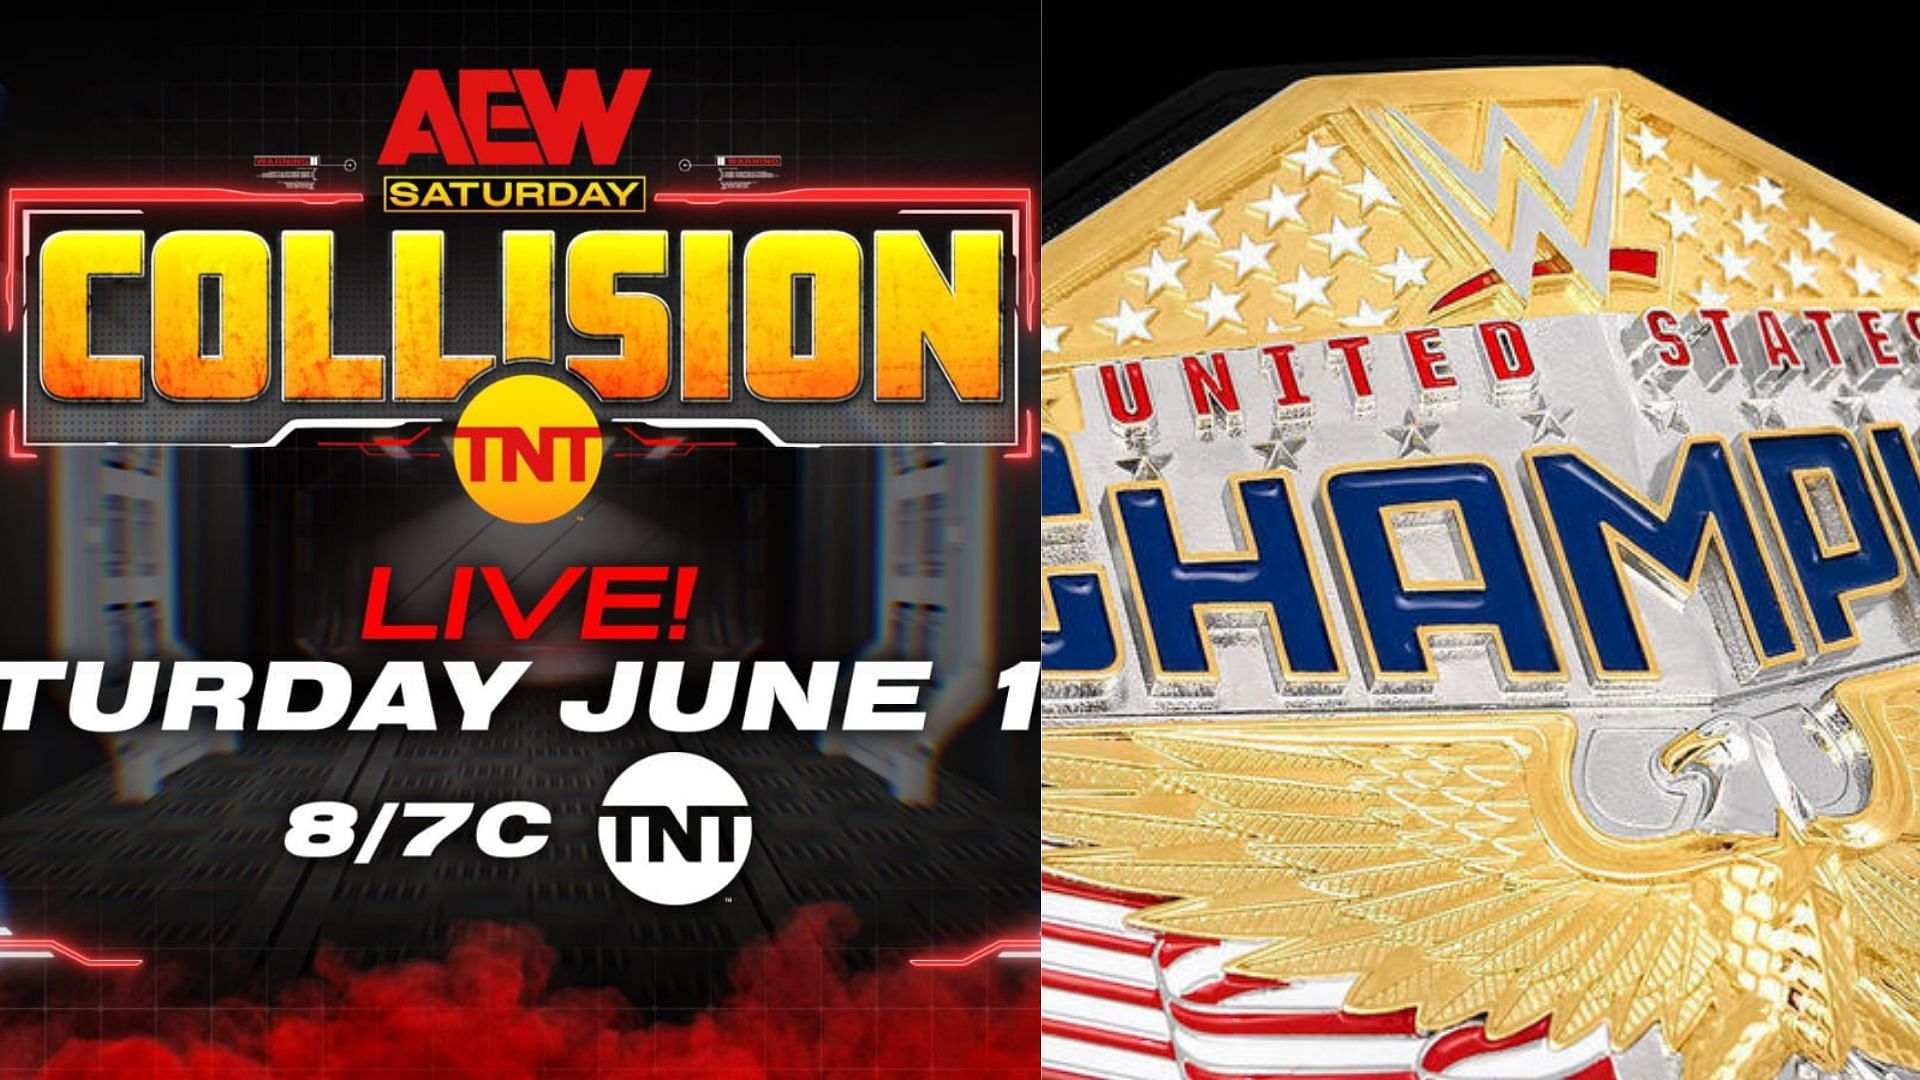 AEW has officially announced its new show &quot;Collision&quot;